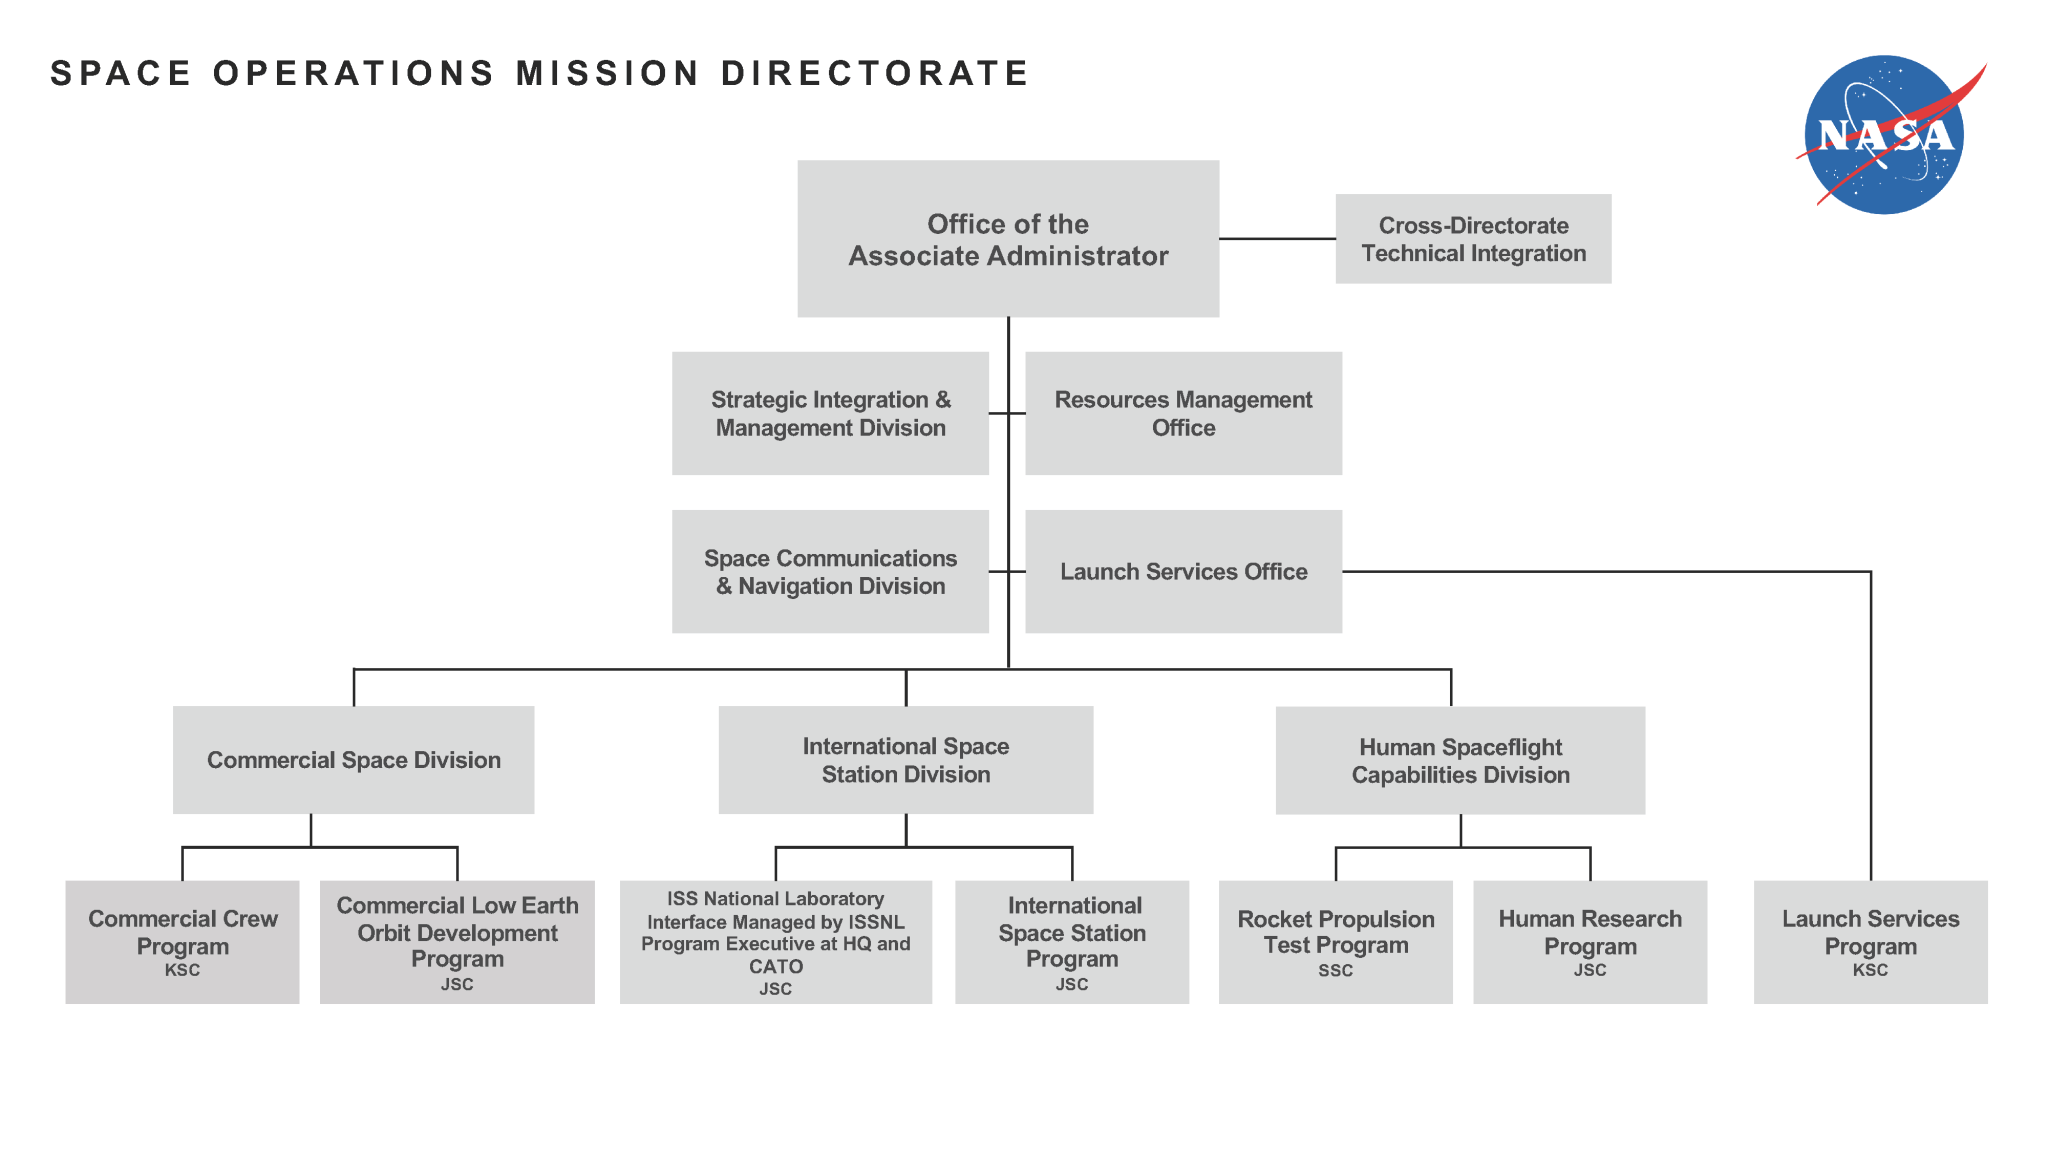 The Space Operations Mission Directorate organization chart. At the top is the Office of the Associate Administrator and the Cross-Directorate Technical Integration boxes. Below the Office of the Associate Administrator box are seven boxes: Strategic Integration & Management Division, Resources Management Office, Space Communications & Navigation Division, Launch Services Office, Commercial Space Division, International Space Station Division, and Human Spaceflight Capabilities Division. Beneath the Launch Services Office is one box, the Launch Services Program at KSC. Beneath the Commercial Space Division box are two boxes: the Commercial Crew Program at KSC and the Commercial Low Earth Orbit Development Program at JSC. Beneath the International Space Station Division box are two boxes: the ISS National Laboratory Interface Managed by ISSNL Program Executive at HQ and CATO at JSC; and the International Space Station Program at JSC. Finally, beneath the Human Spaceflight Capabilities Division box are two boxes: the Rocket Propulsion Test Program at SSC and the Human Research Program at JSC.